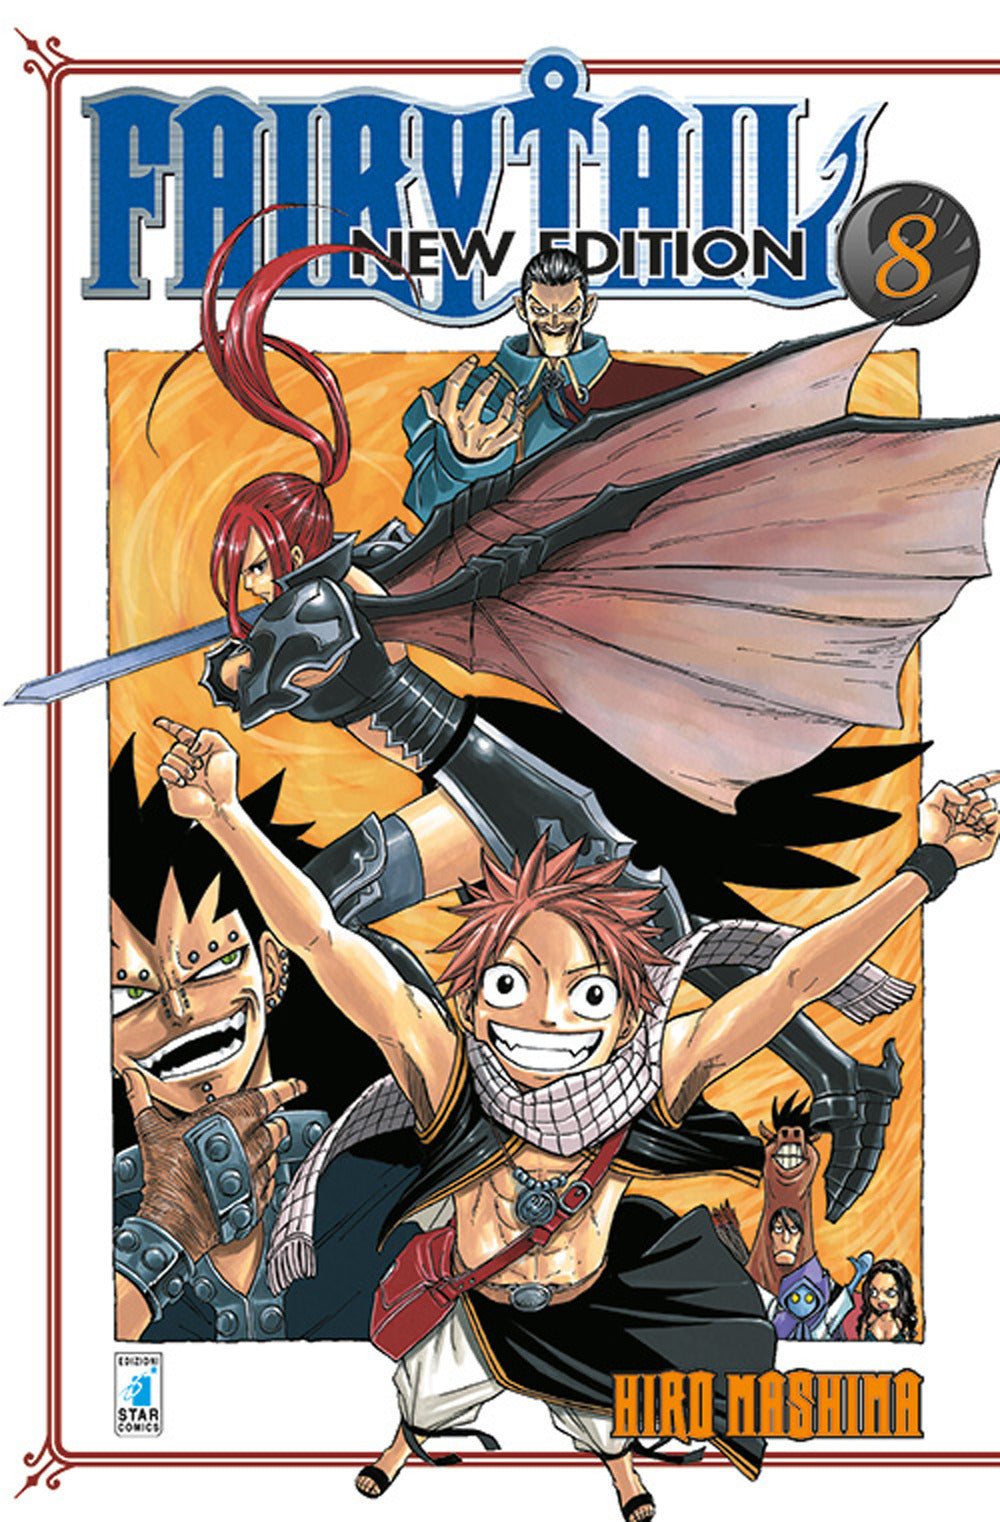 Fairy Tail. New edition. Vol. 8.